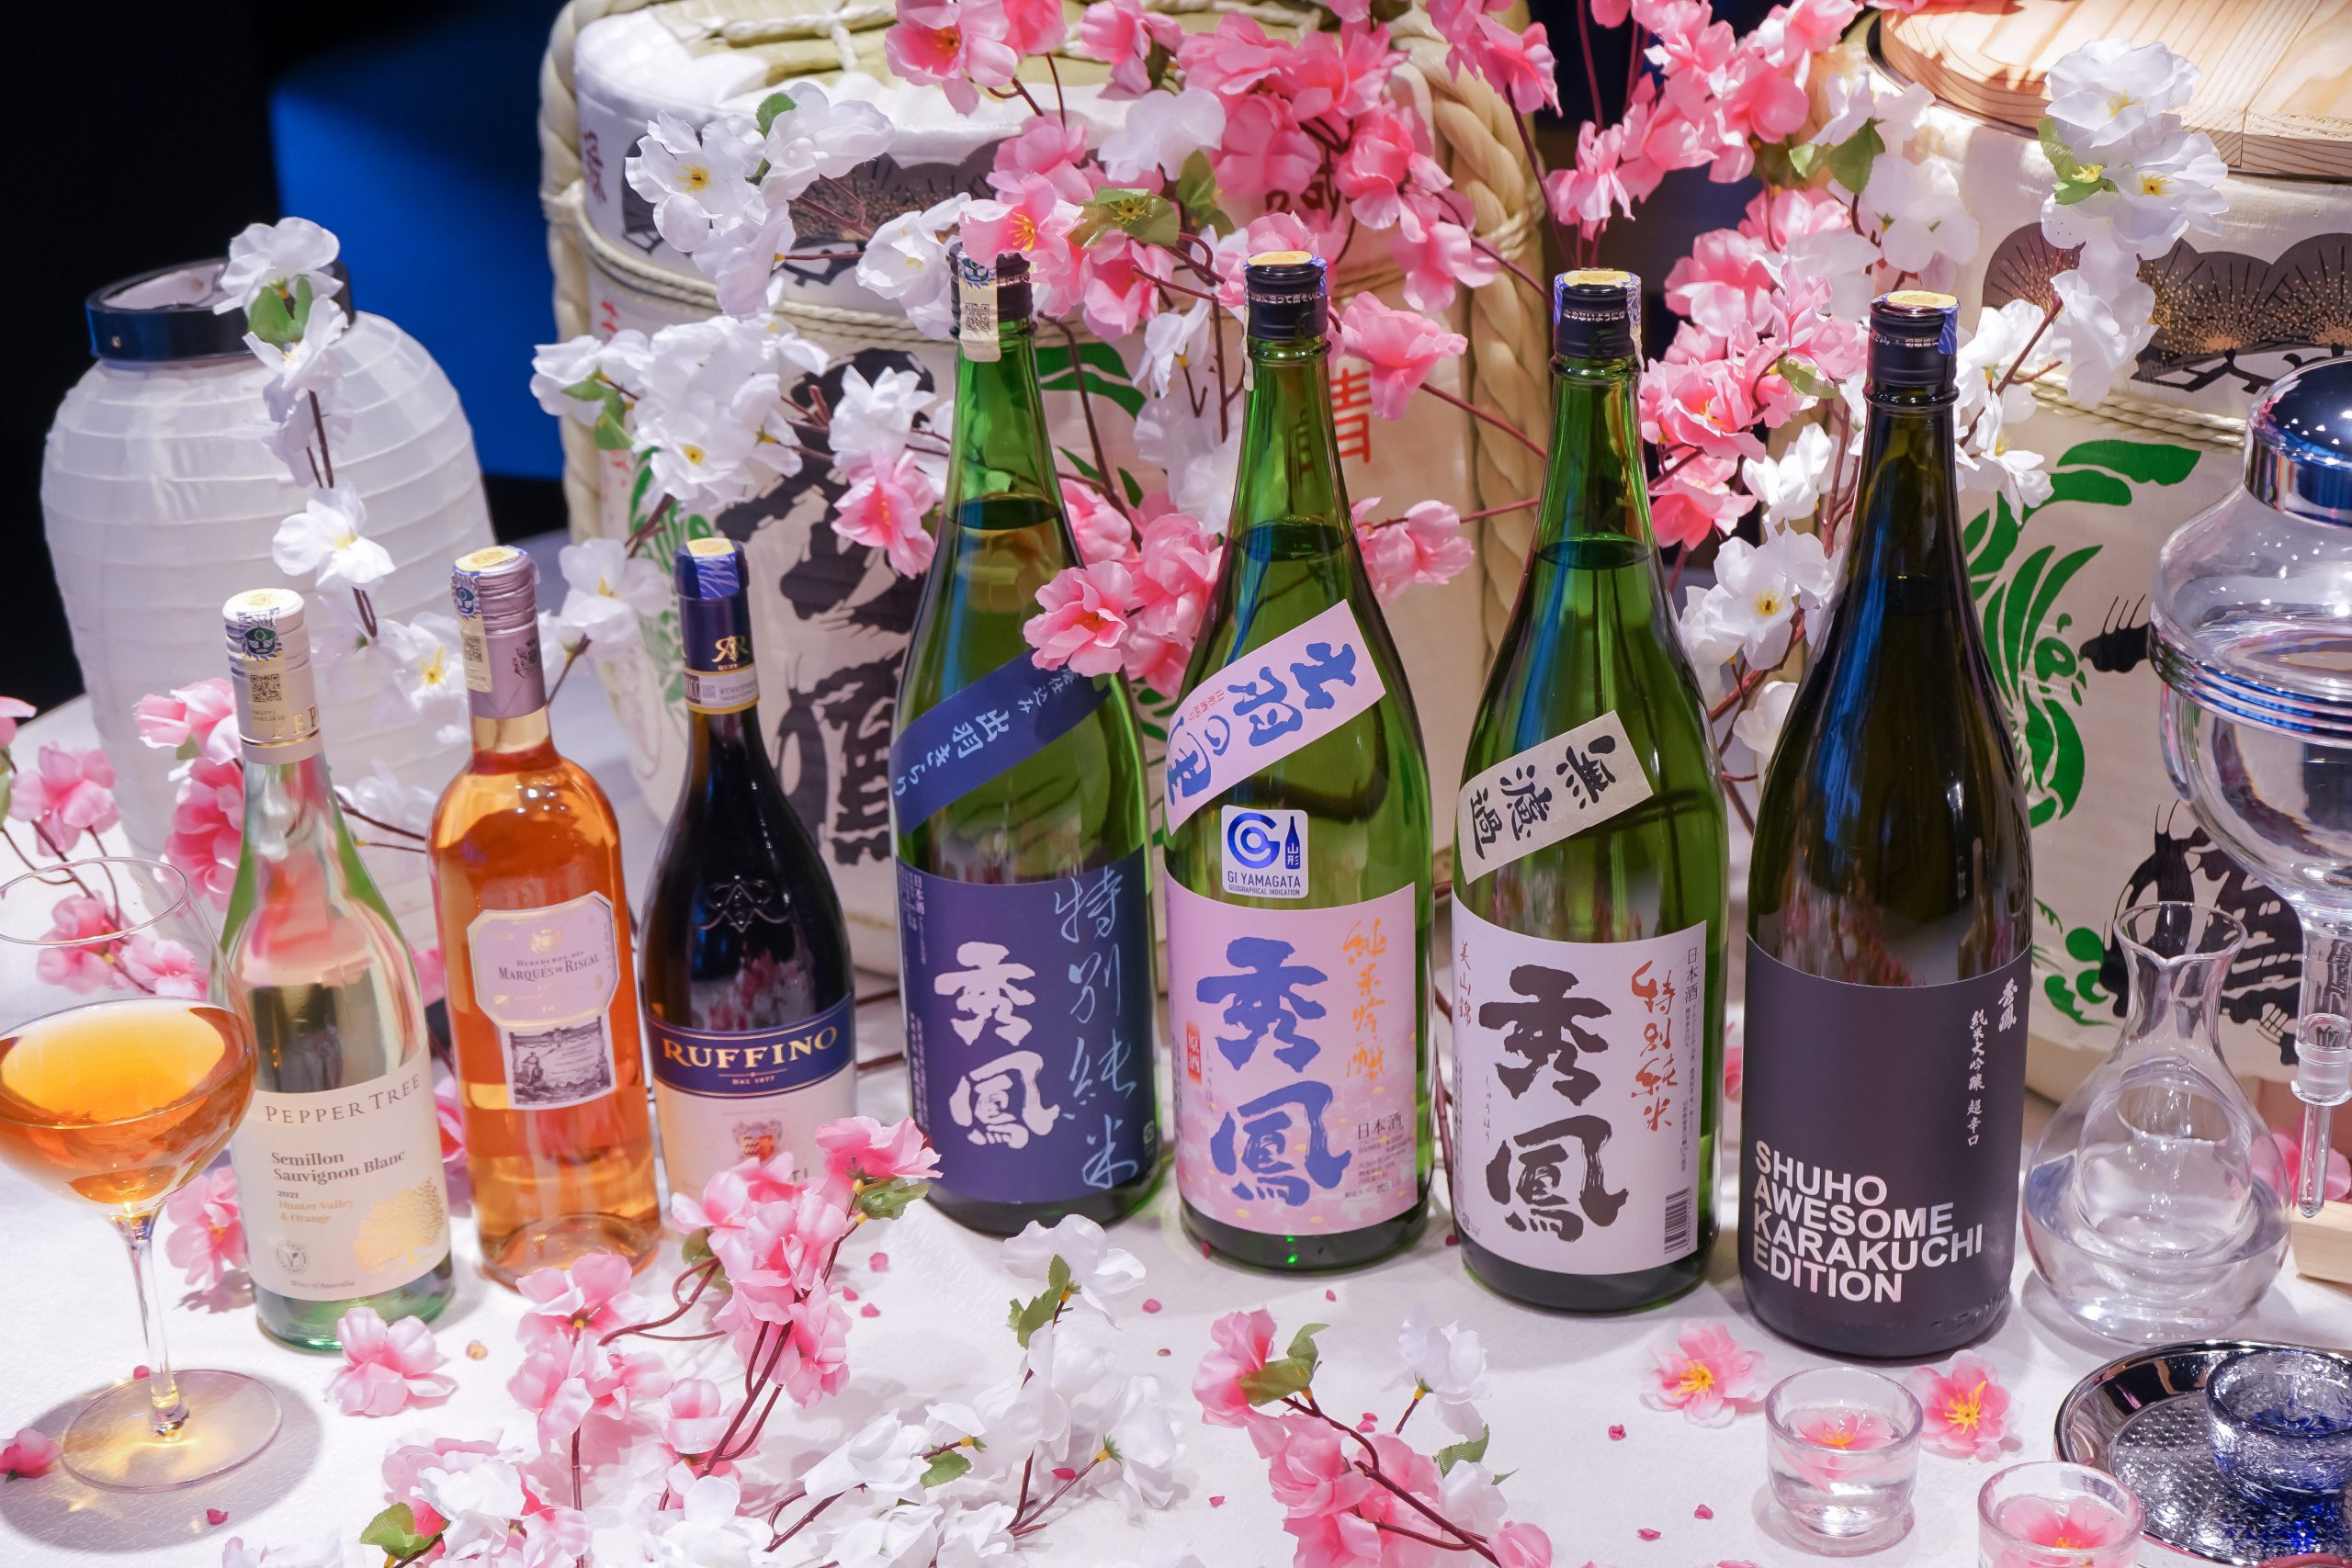 A collection of wine and sake bottles.